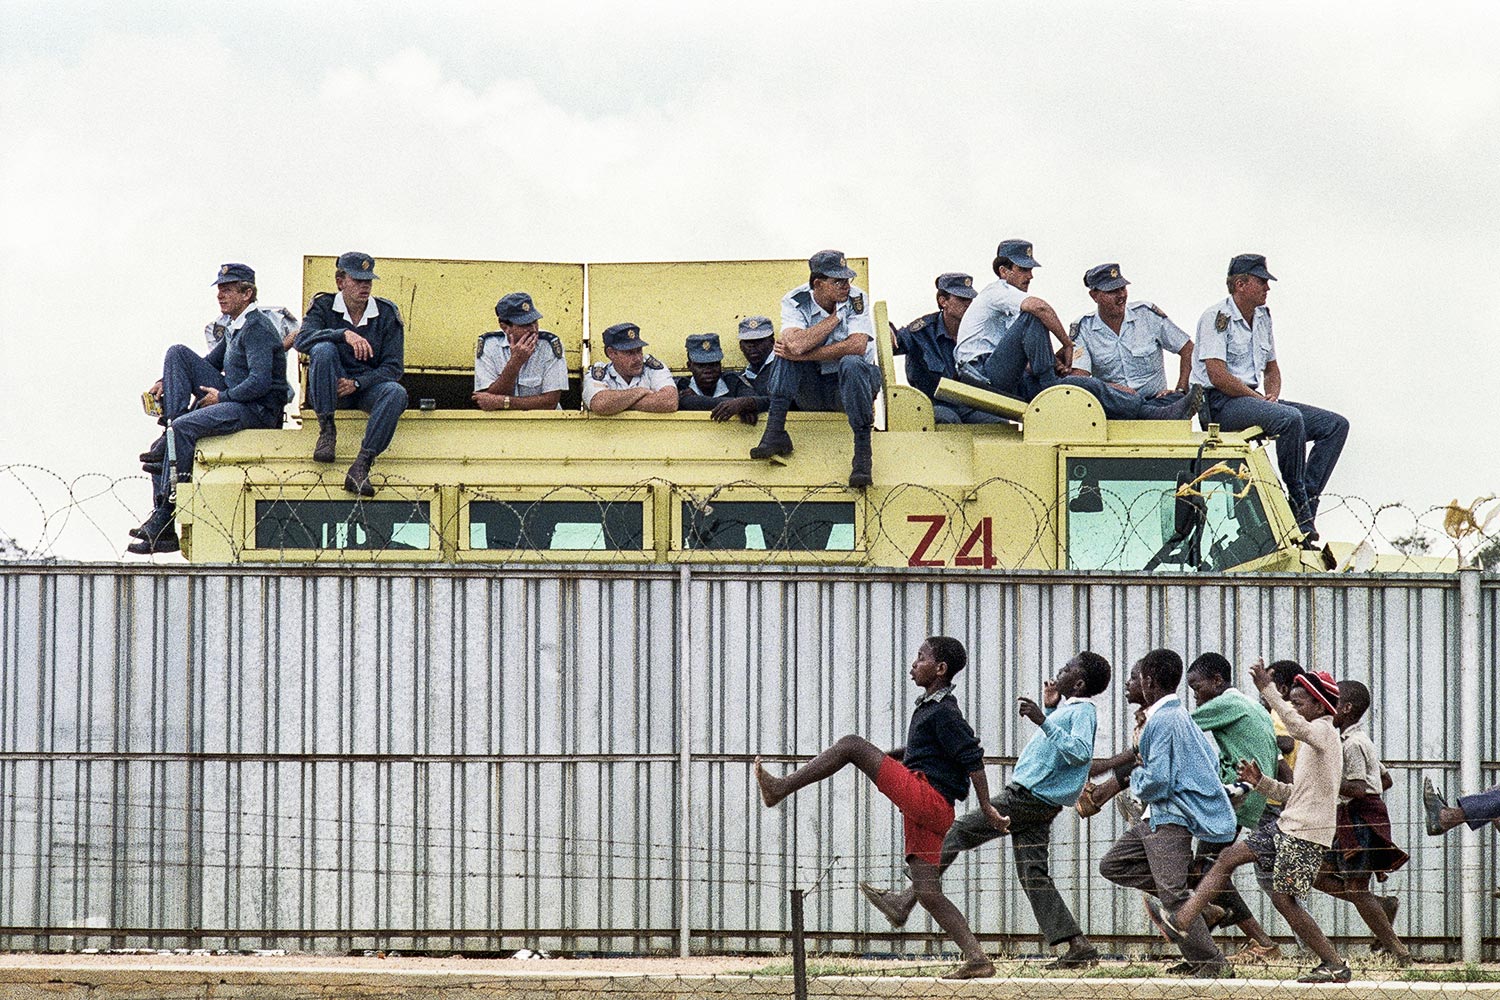 An image from ‘Mandela’: Children taunting police during a 1991 African National Congress rally in Johannesburg